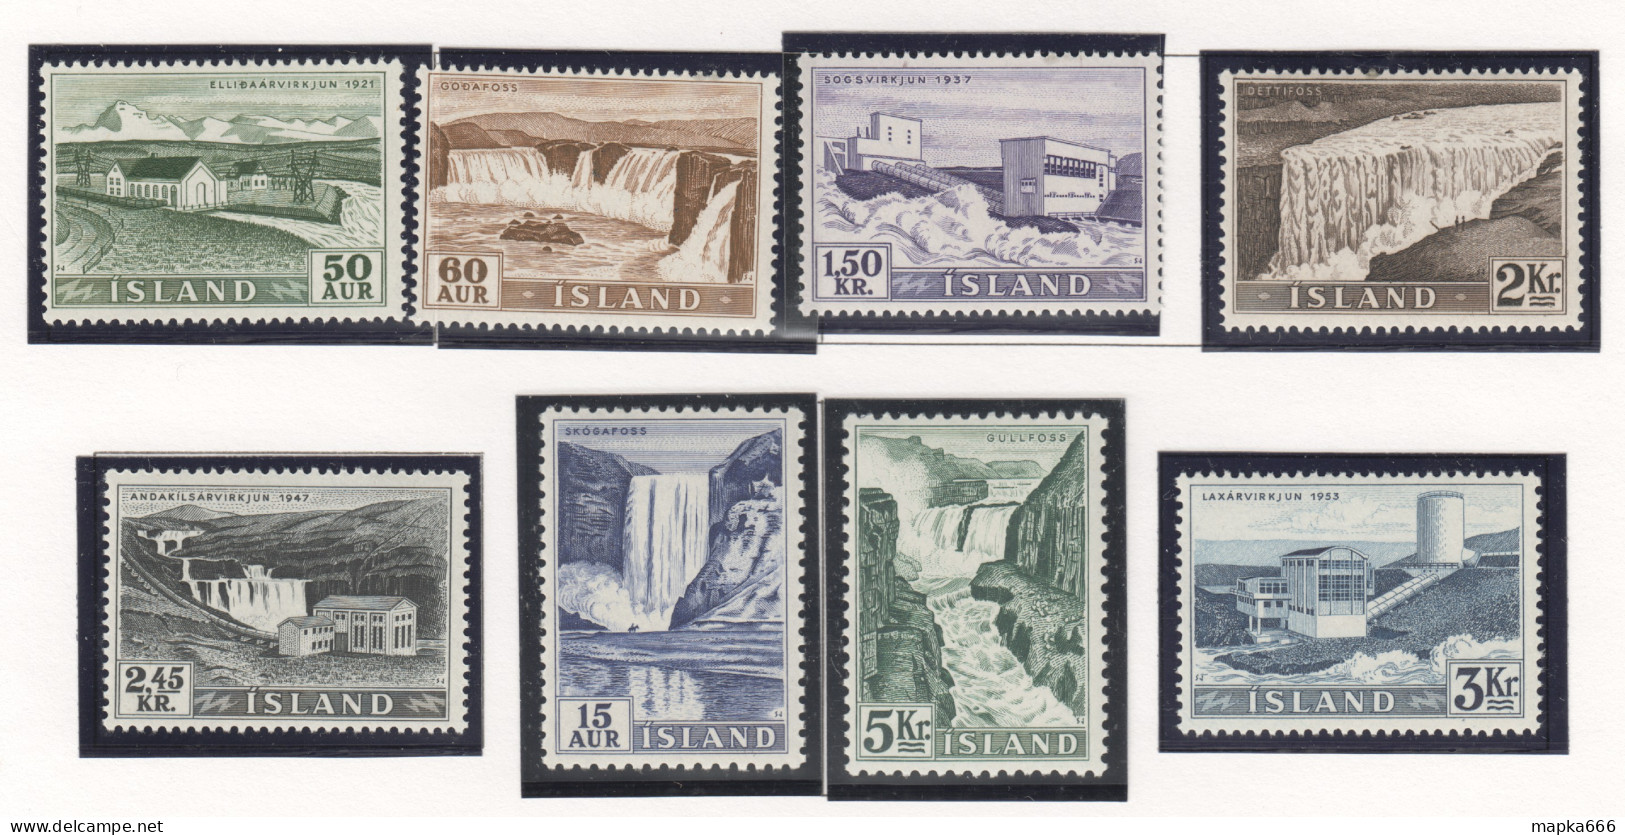 Sp692 1956 Iceland Hydro Electric Power Plant Michel #303-10 60 Euro 1Set Mnh - Unused Stamps